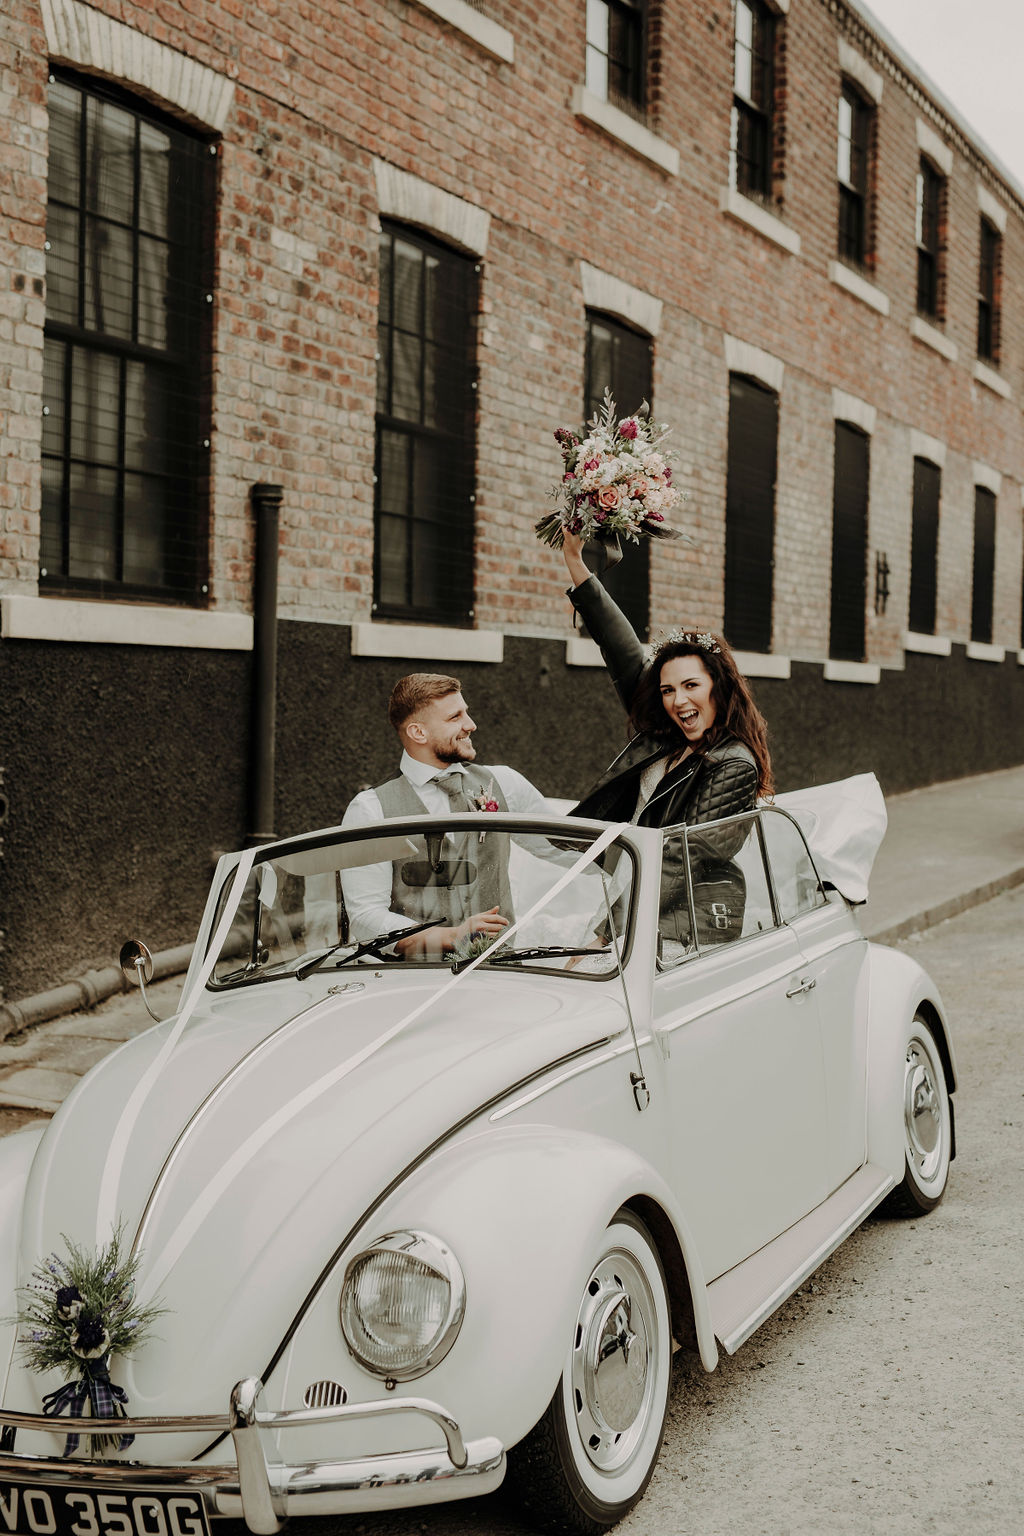  the best wedding suppliers Scotland Glasgow wedding photographer The Engine Works price boho rock moody relaxed
 